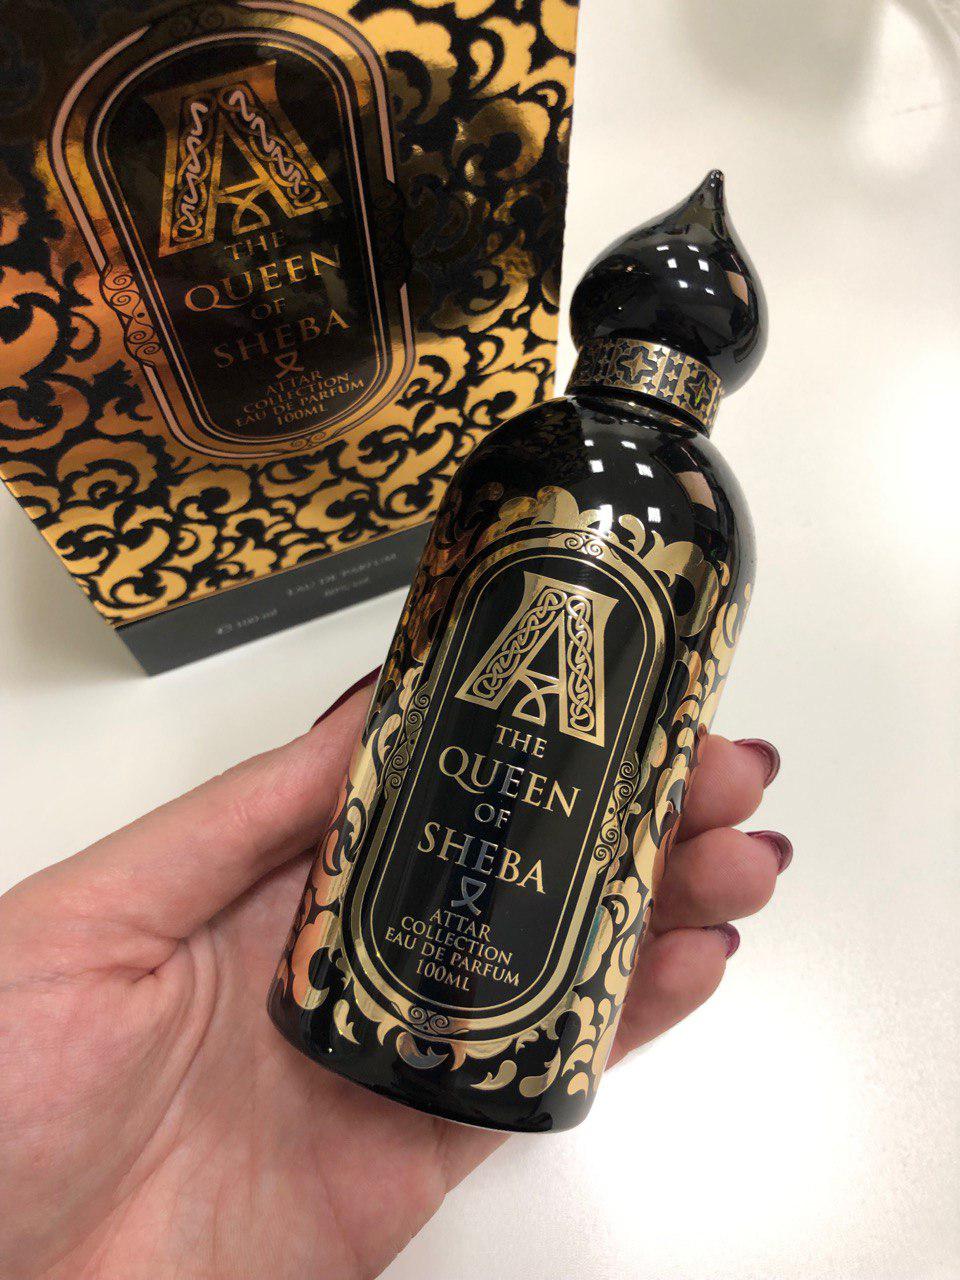 Collection the queen of sheba. Духи Квин Шеба. Аттар Королева Шеба. Attar collection the Queen of Sheba, 100 ml. Аттар Queen.